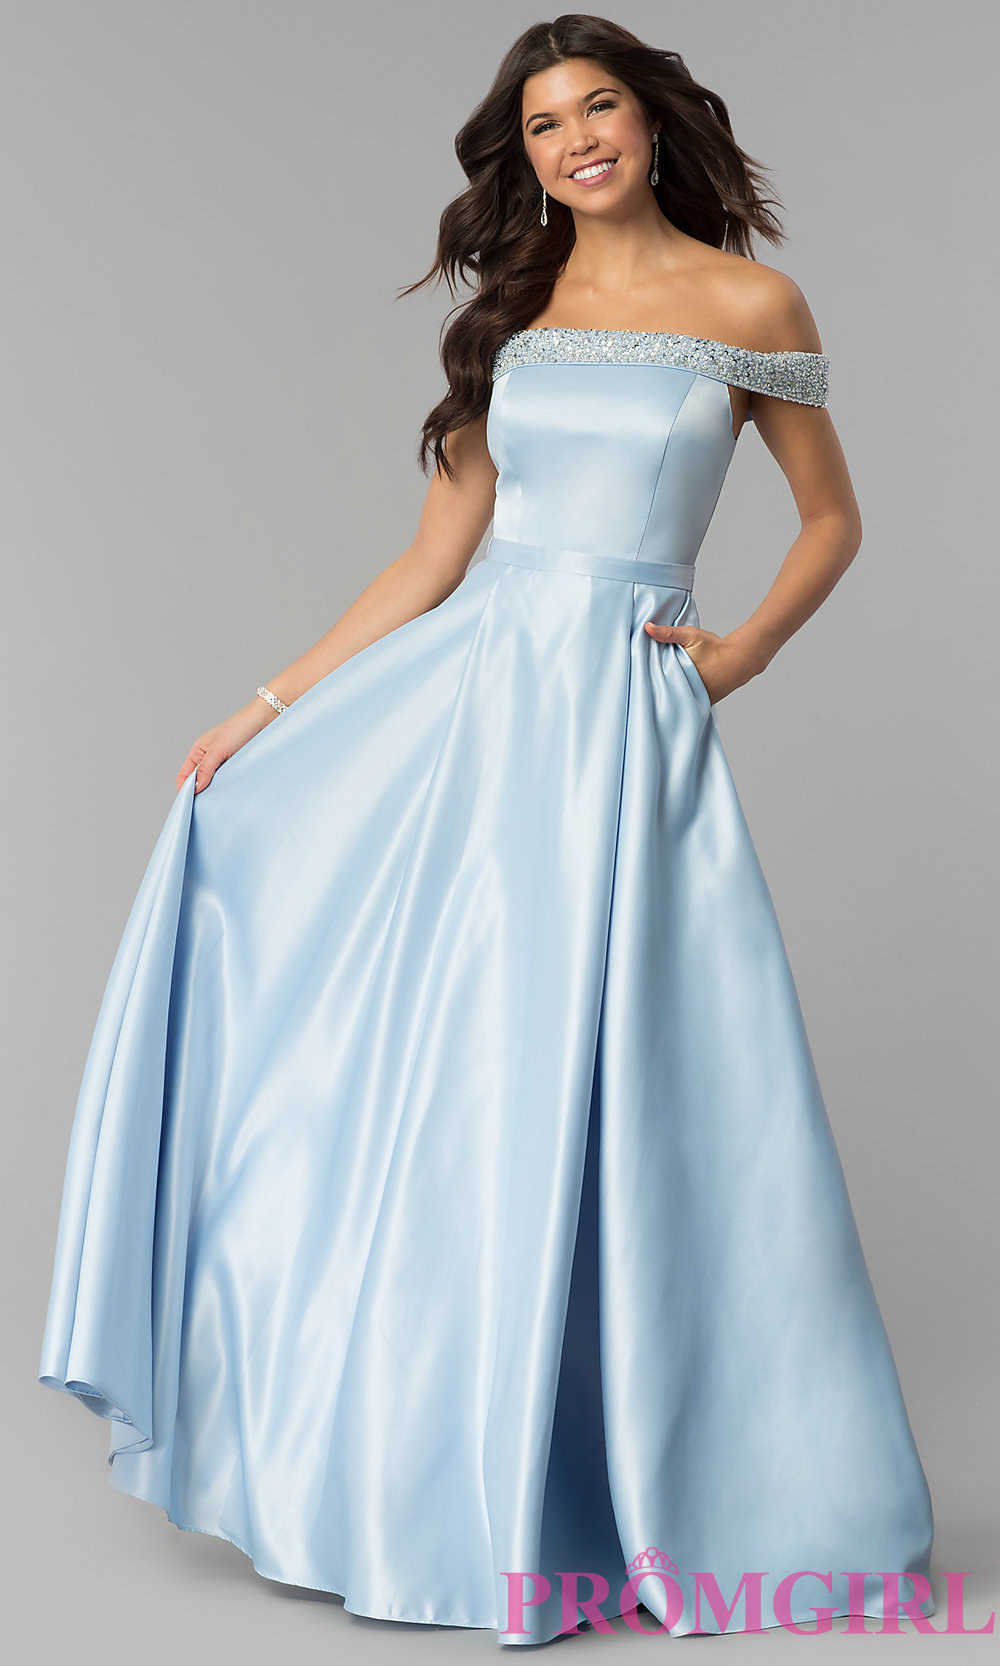 places to prom dress shop